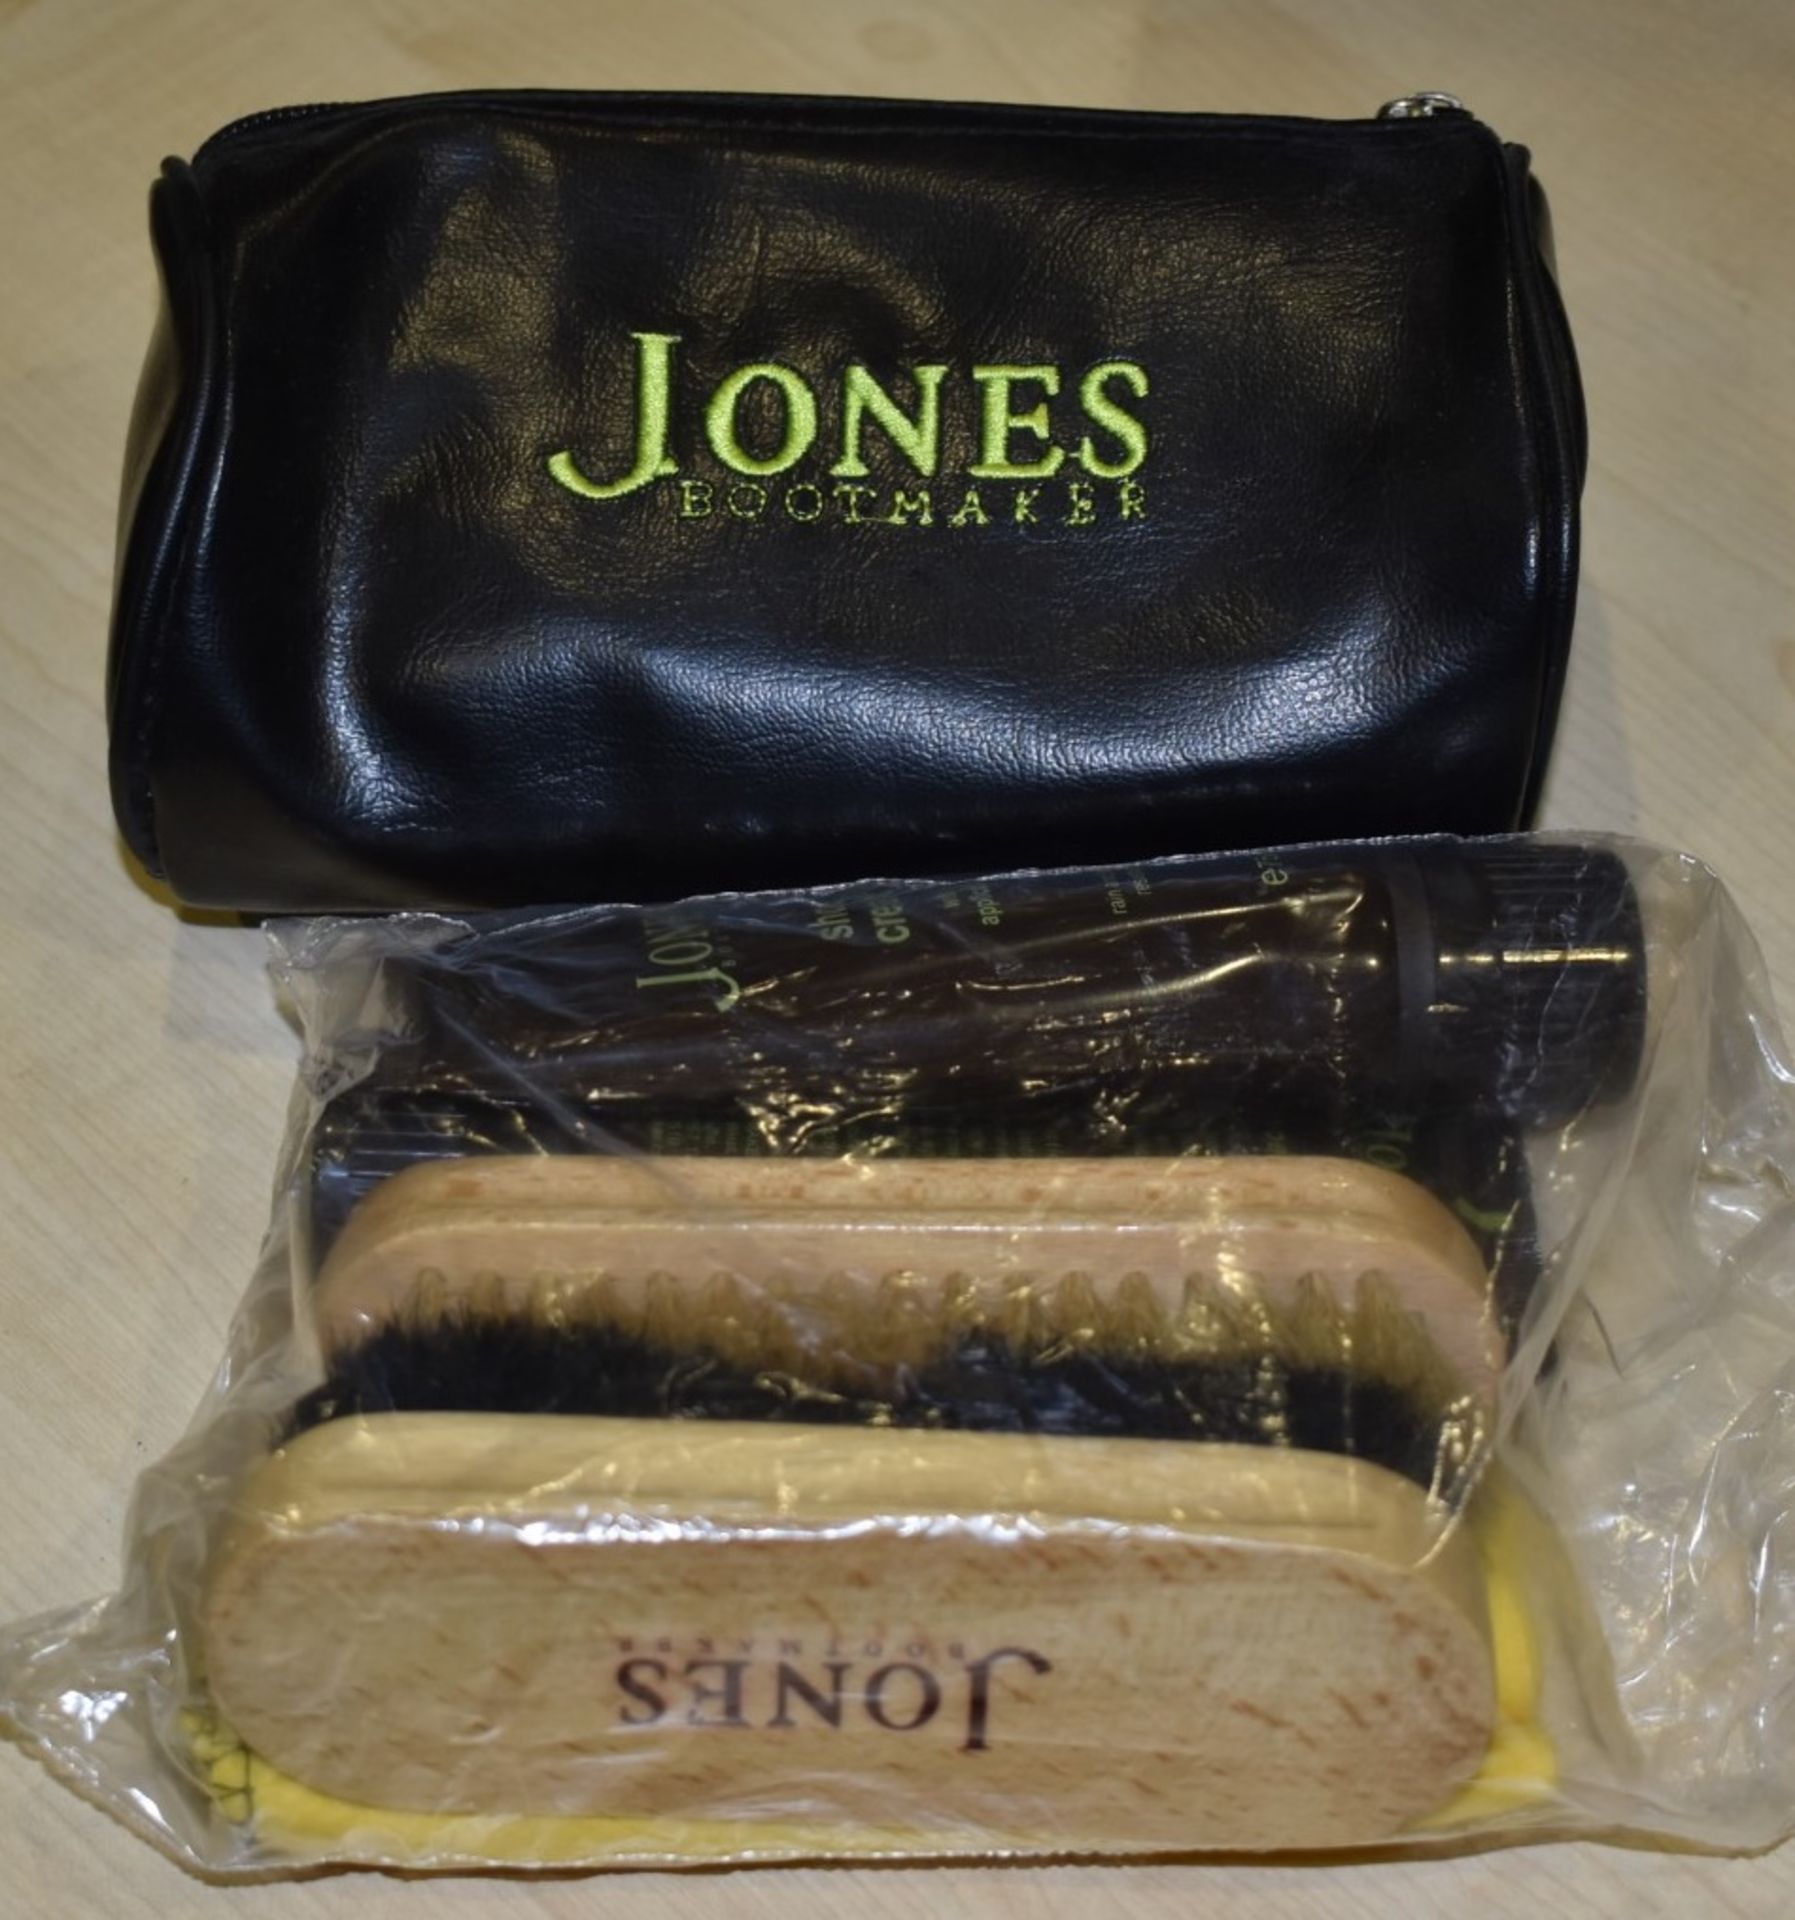 1 x Brand New Jones Shoe Cleaning Kit - Includes Creams, Brushes, Clothe and Carry Case - Ref: - Image 3 of 4